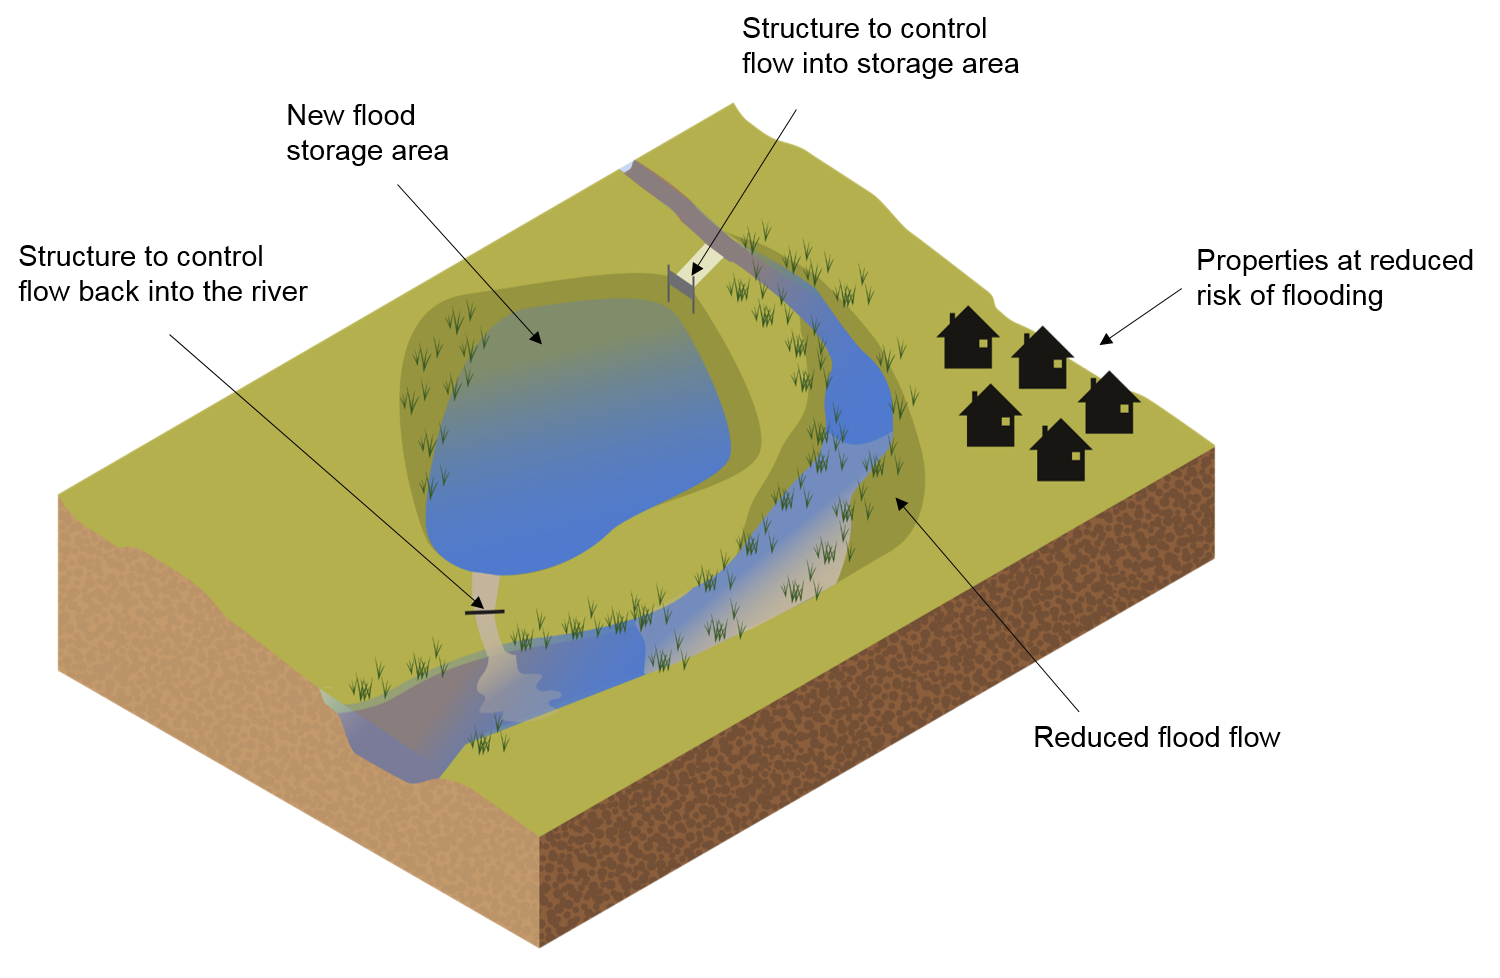 There is a river that flows from the top right to the bottom left of the image. There are buildings on the right side of the river and an offline flood storage area on the left side of the river. At the top section of the river there is a channel built redirecting water to the top edge of the offline storage area. At the bottom edge of the offline storage area, there is channel controlling flow of water back to the river.